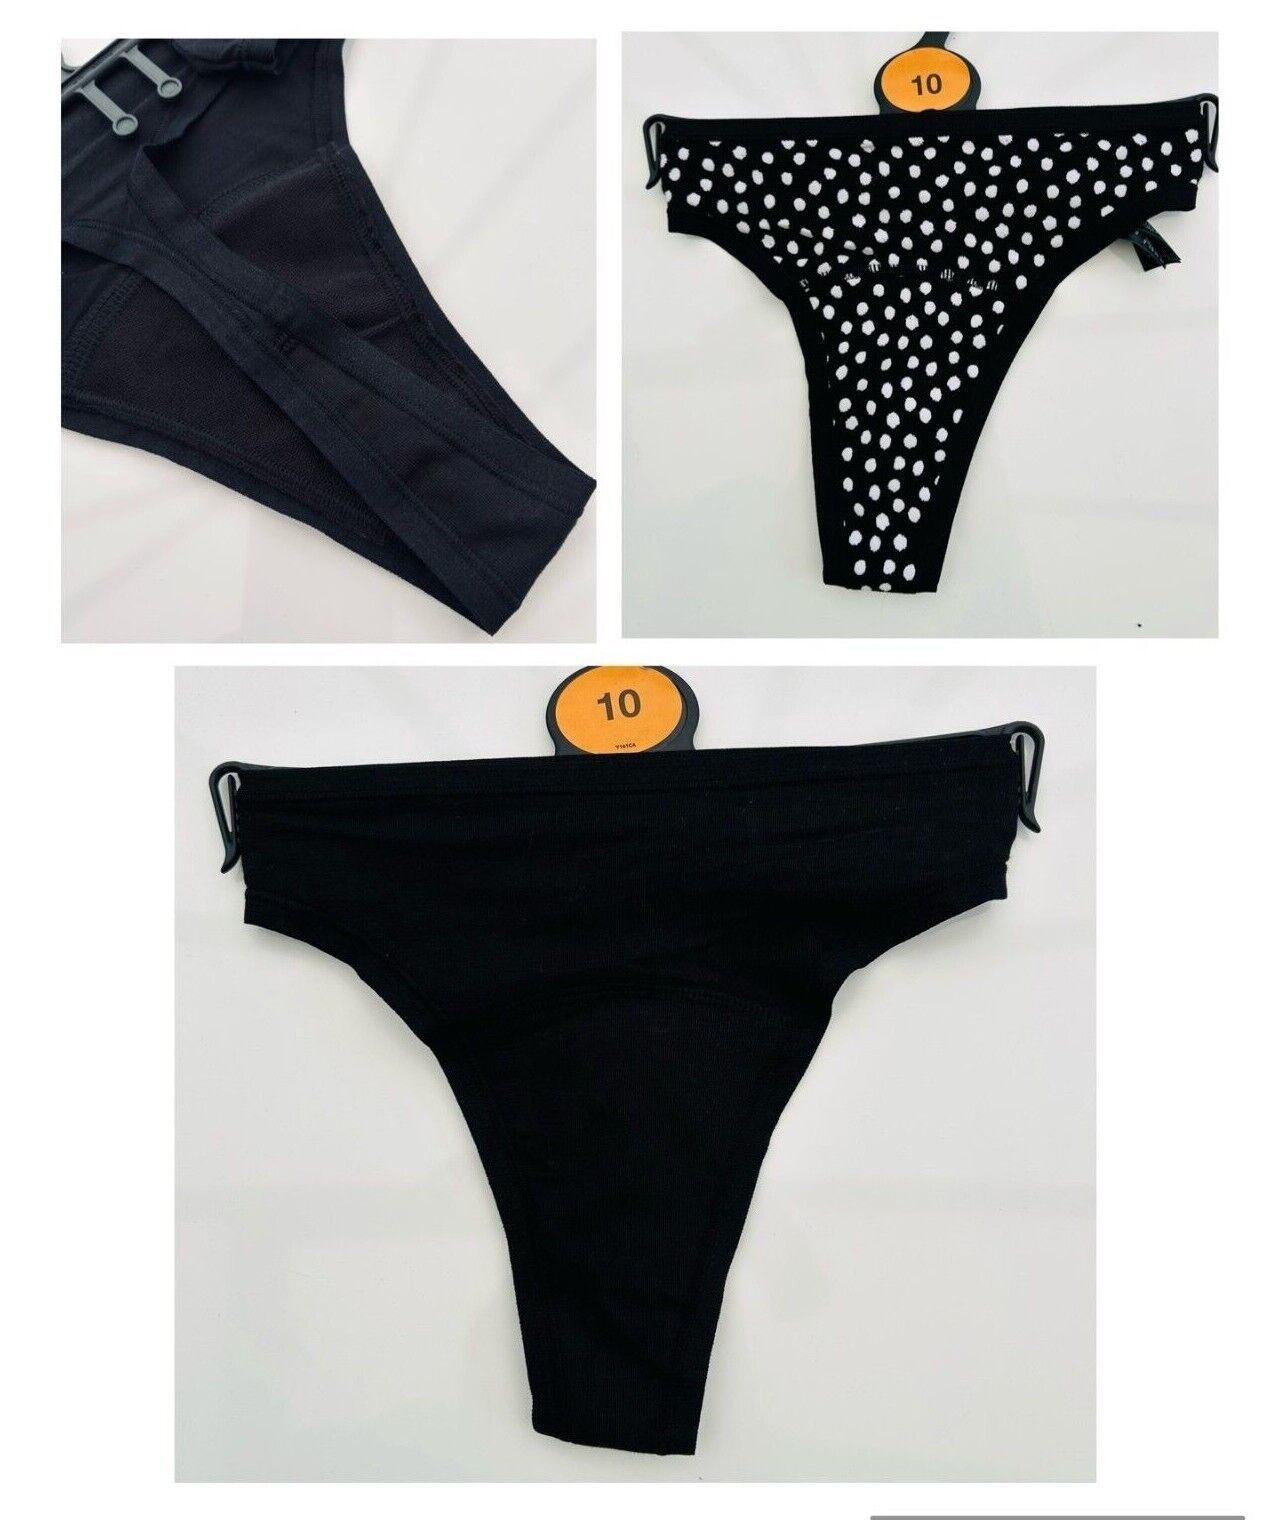 Ex Famous Store Brand Period Knickers Confidence Thongs Menstrual Leak Proof Light Absorbency